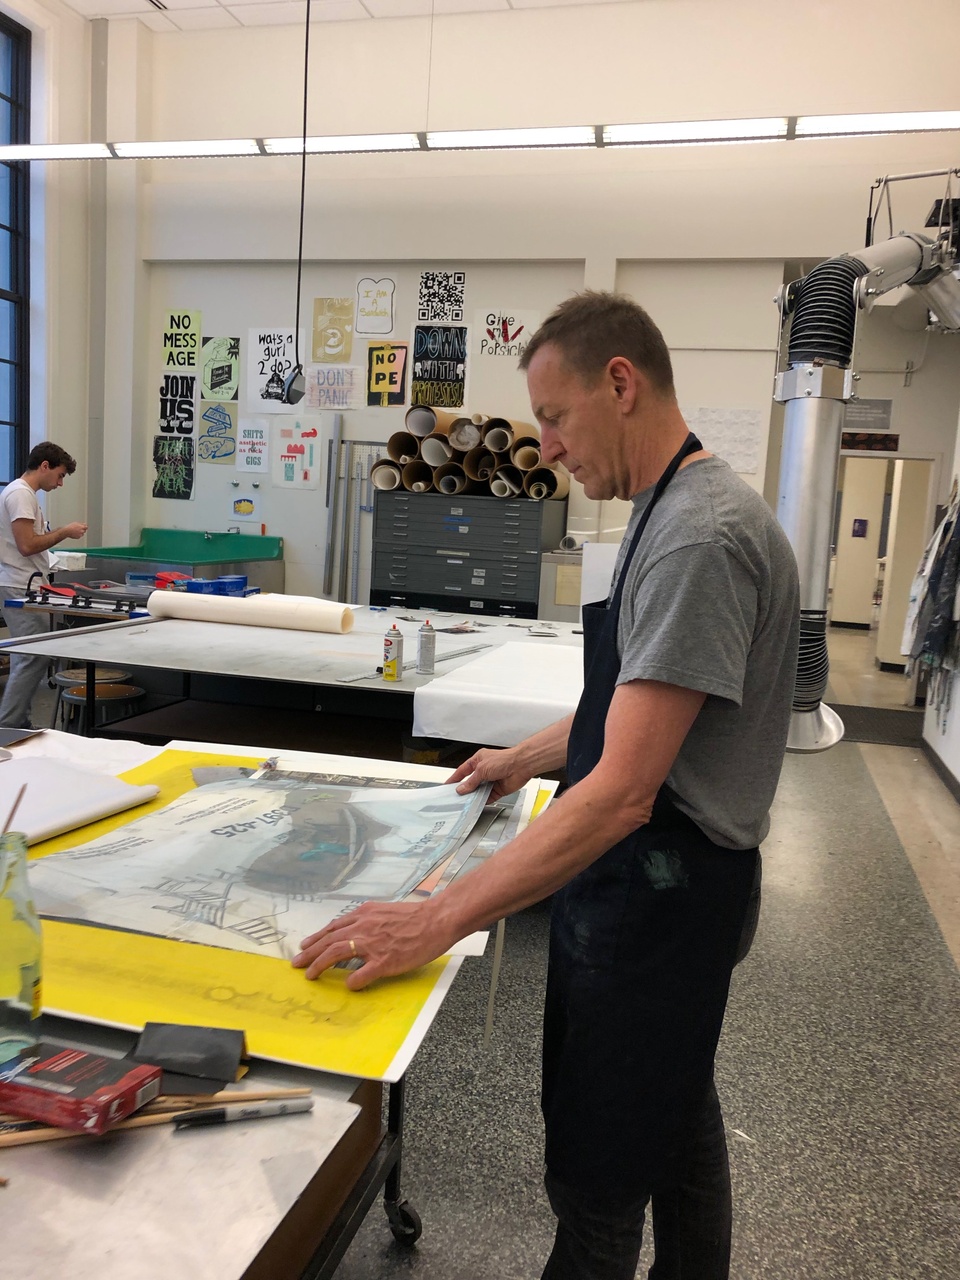 David laying out large prints on a table in the print shop